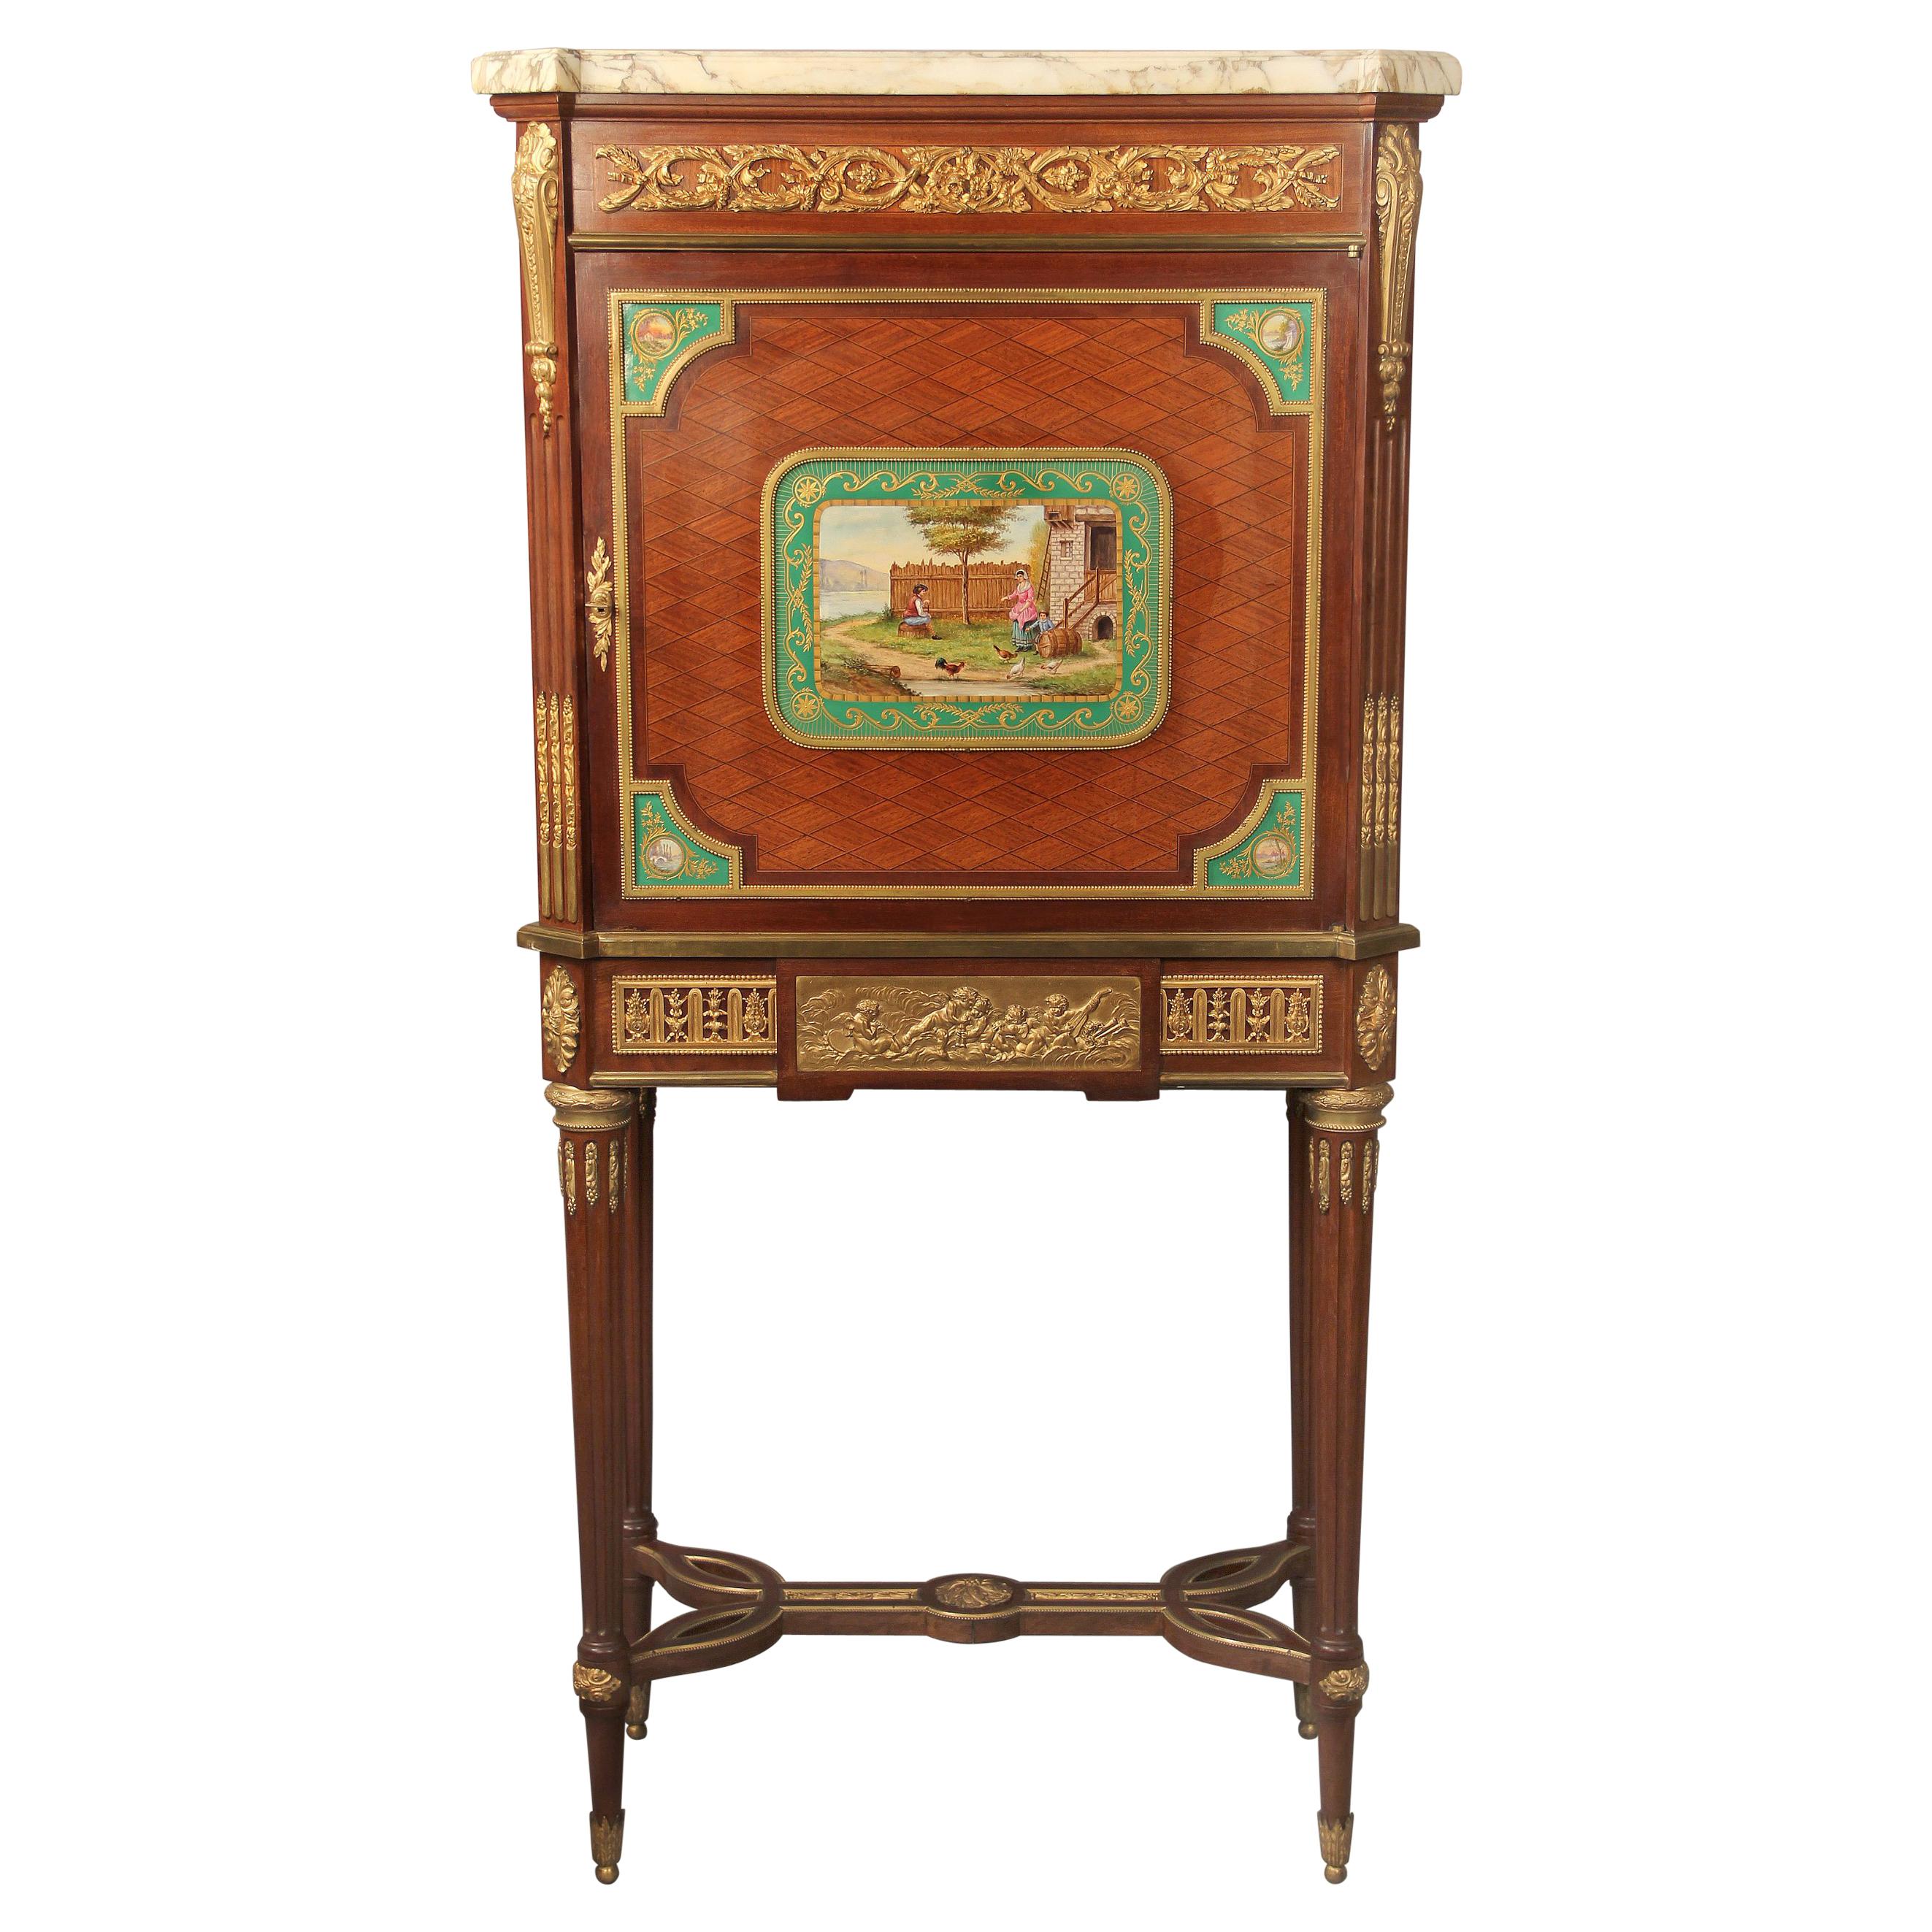 19th Century Gilt Bronze and Sèvres Style Porcelain Mounted Parquetry Cabinet For Sale